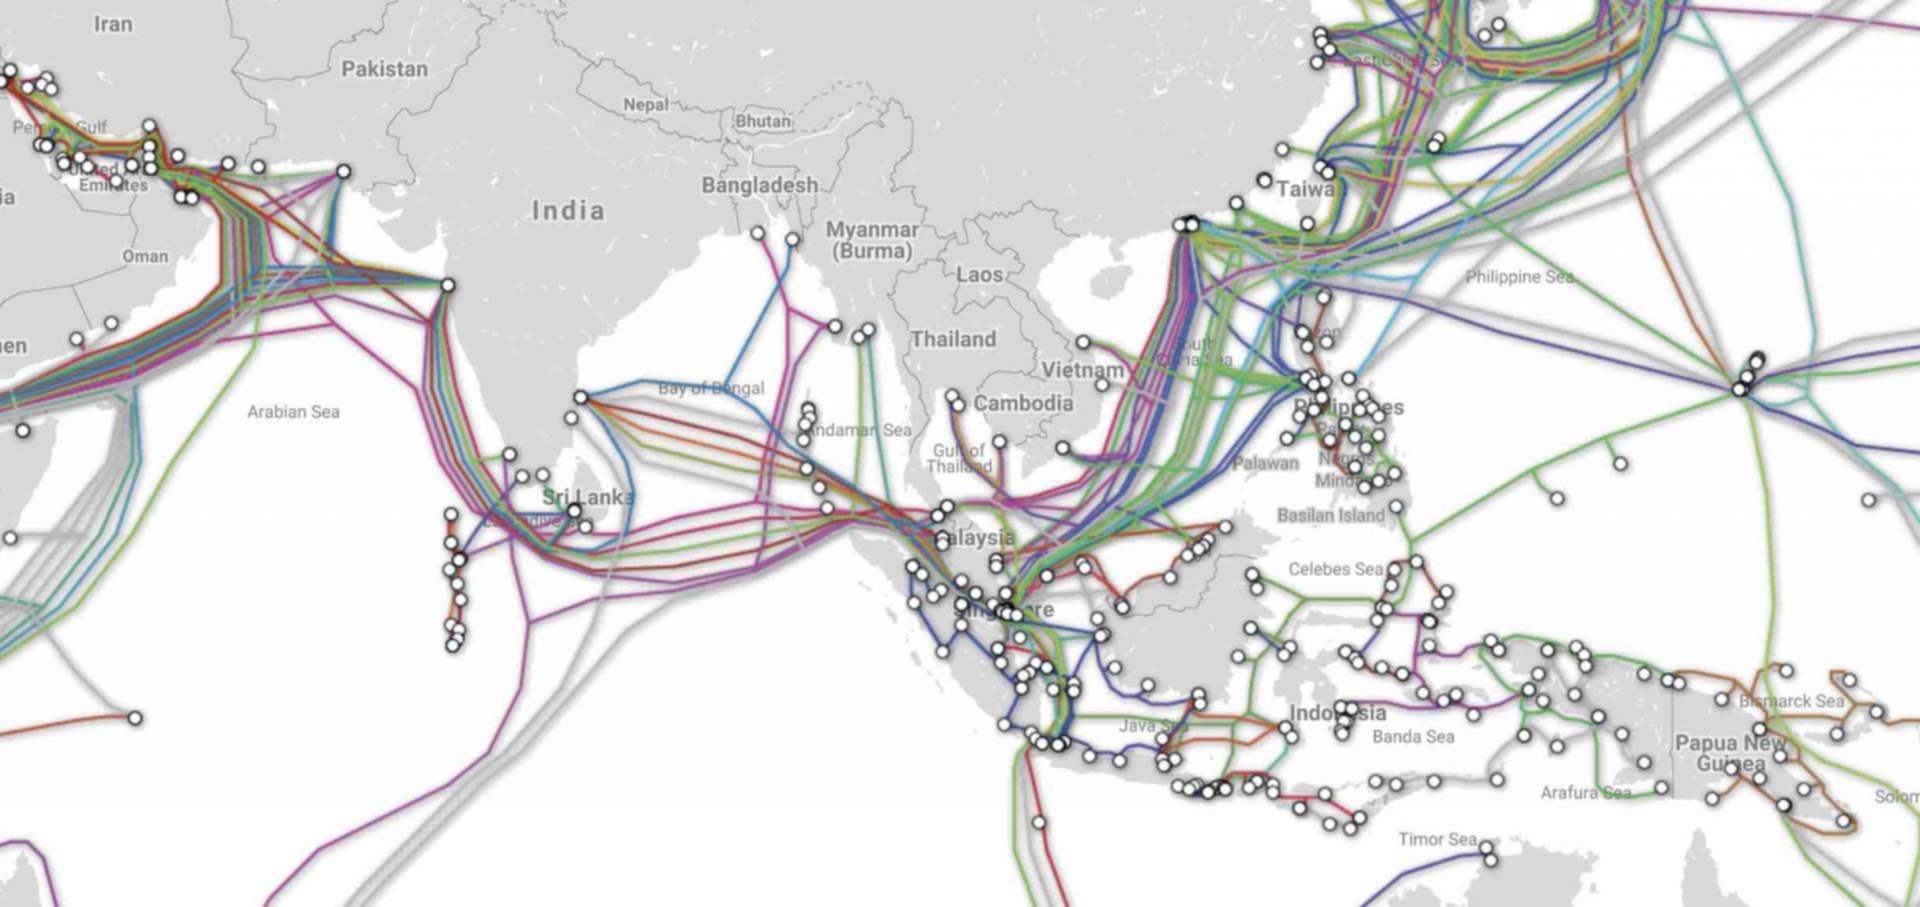 Image of internet sea cables in South-East Asia from submarinecablemap.com